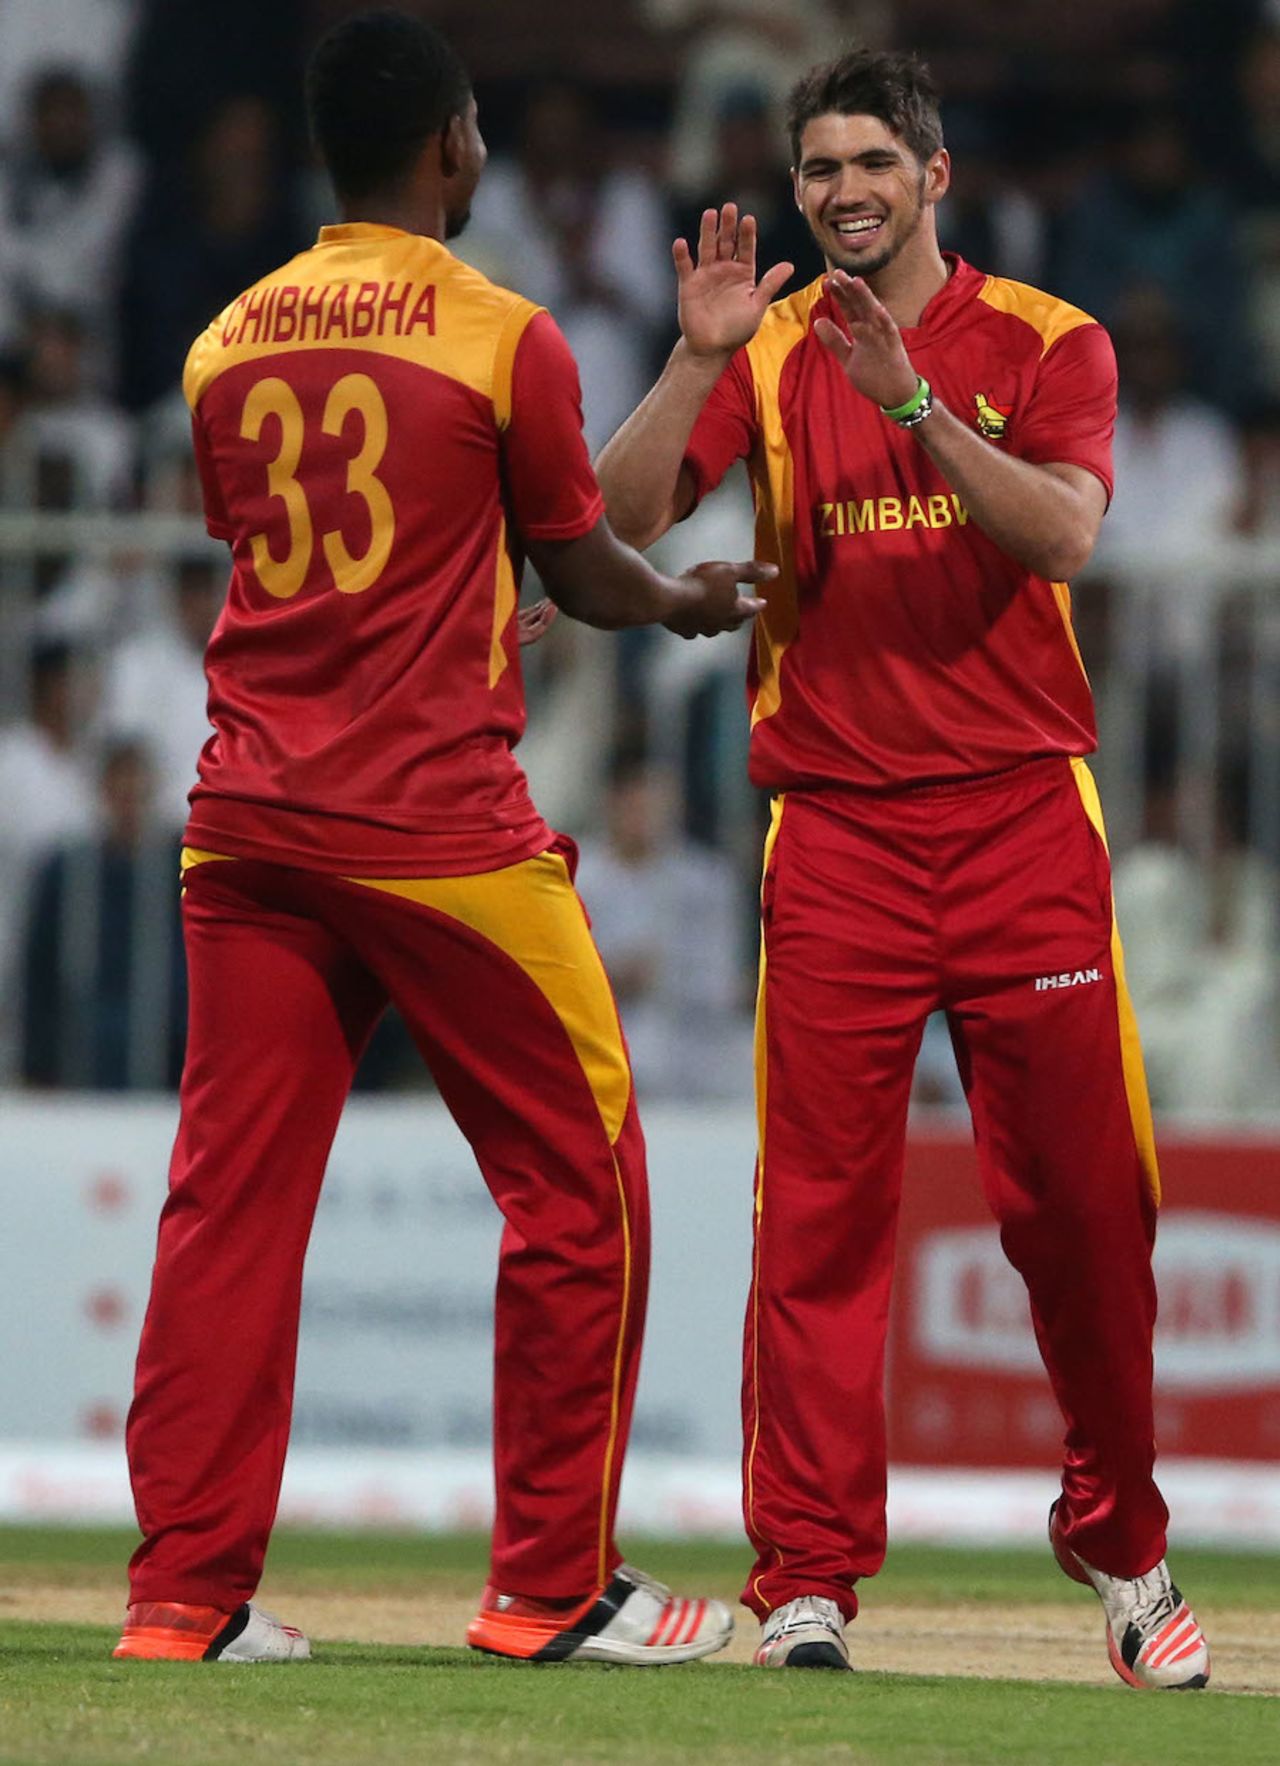 Graeme Cremer found a rare reason to smile, Afghanistan v Zimbabwe, 2nd T20I, Sharjah, January 10, 2016